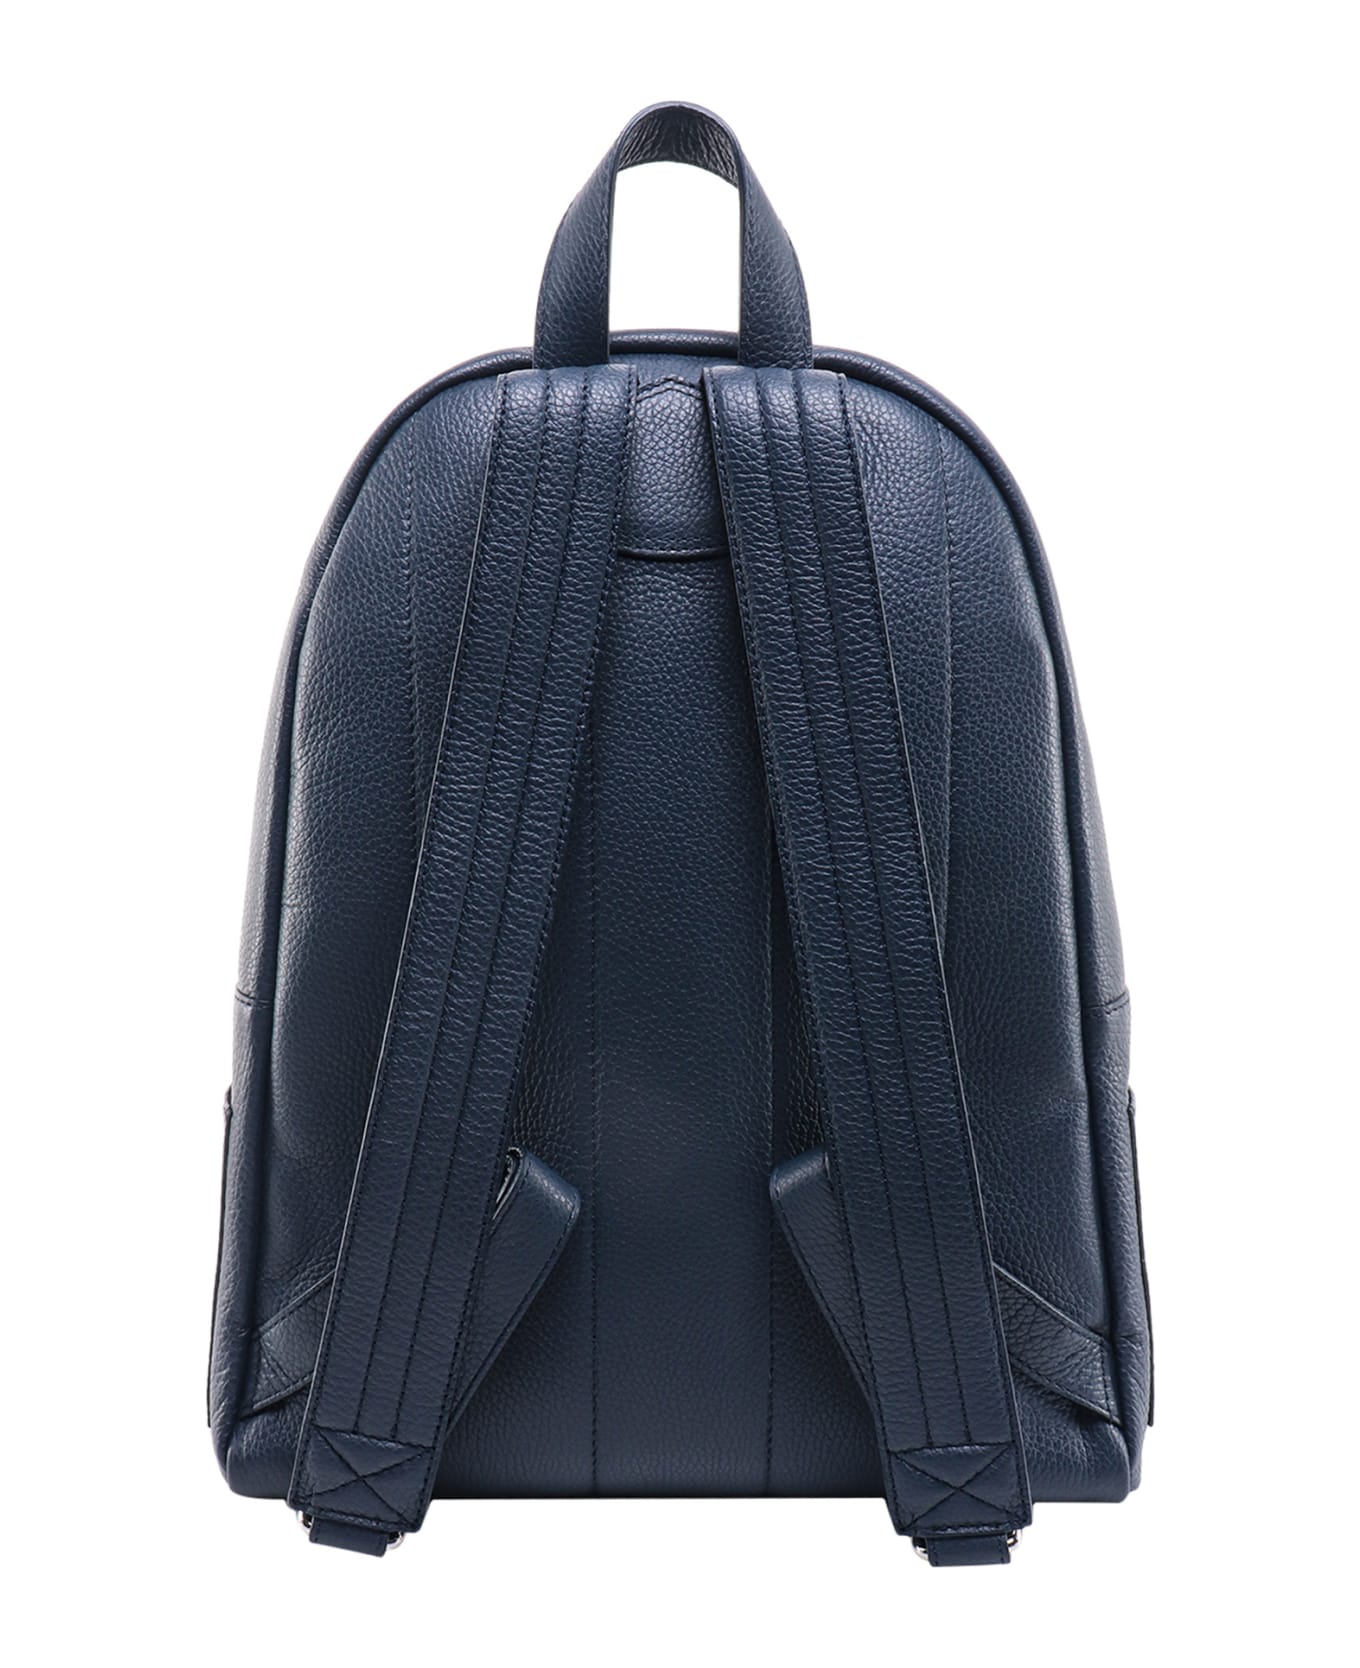 Orciani Backpack - Blue